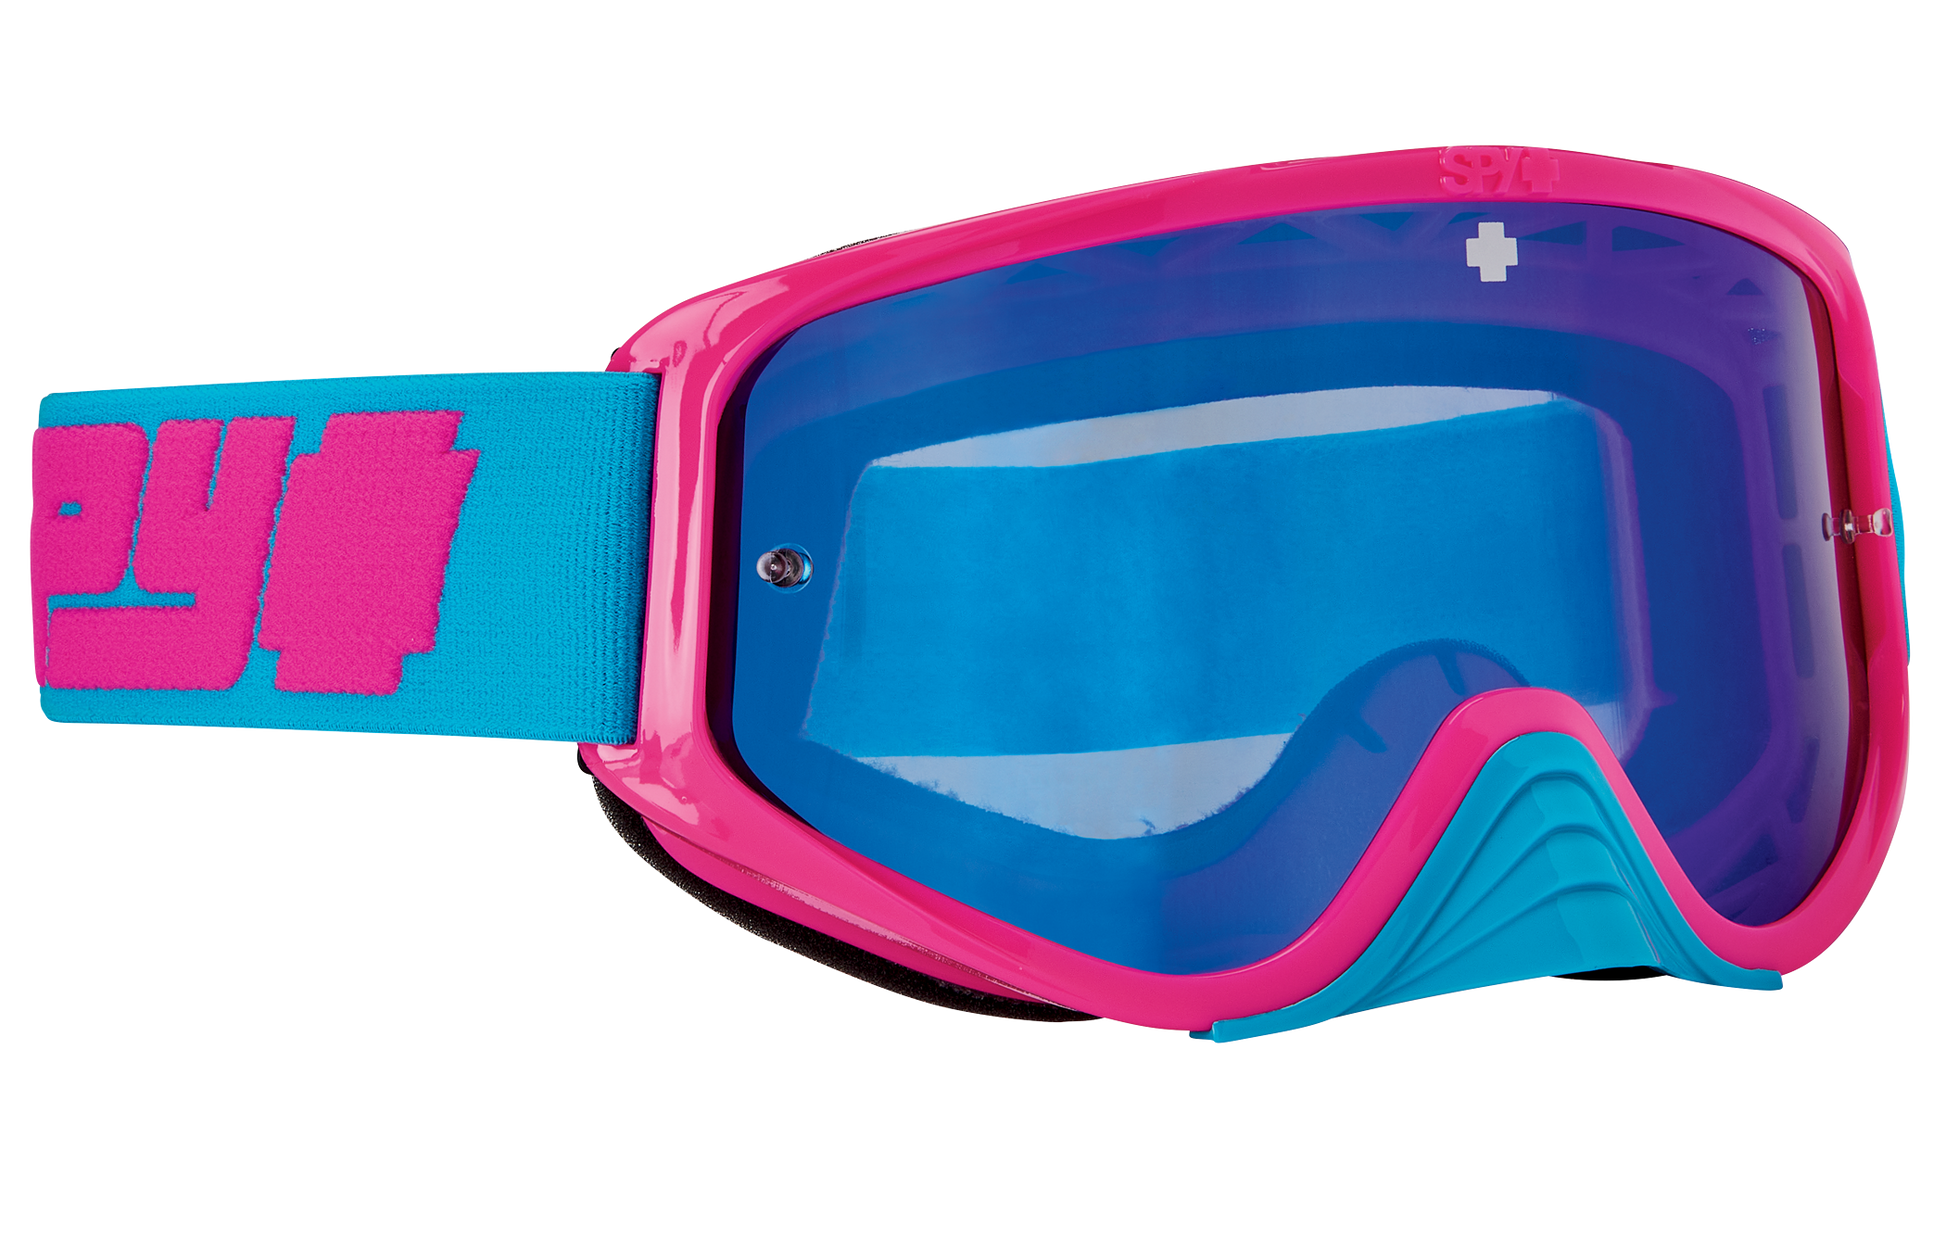 SPY Woot Race Mx Goggle Goggles  HD Smoke with Light Blue Spectra Mirror - HD Clear Reverb Blue One Size